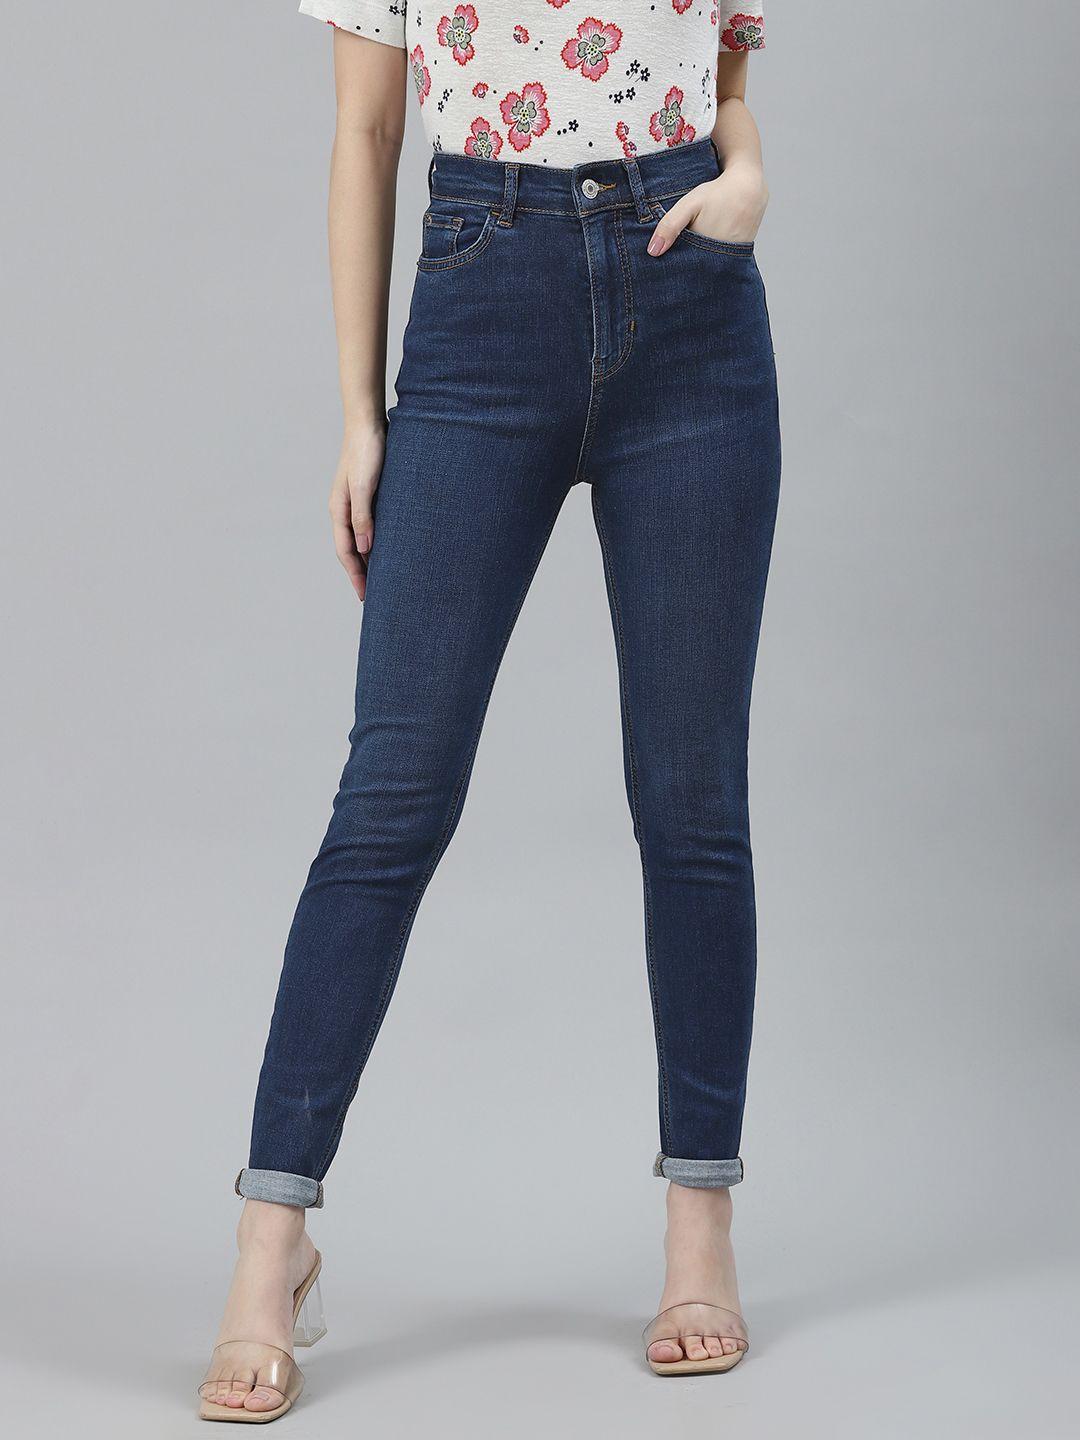 marks & spencer women navy blue skinny fit high-rise clean look jeans